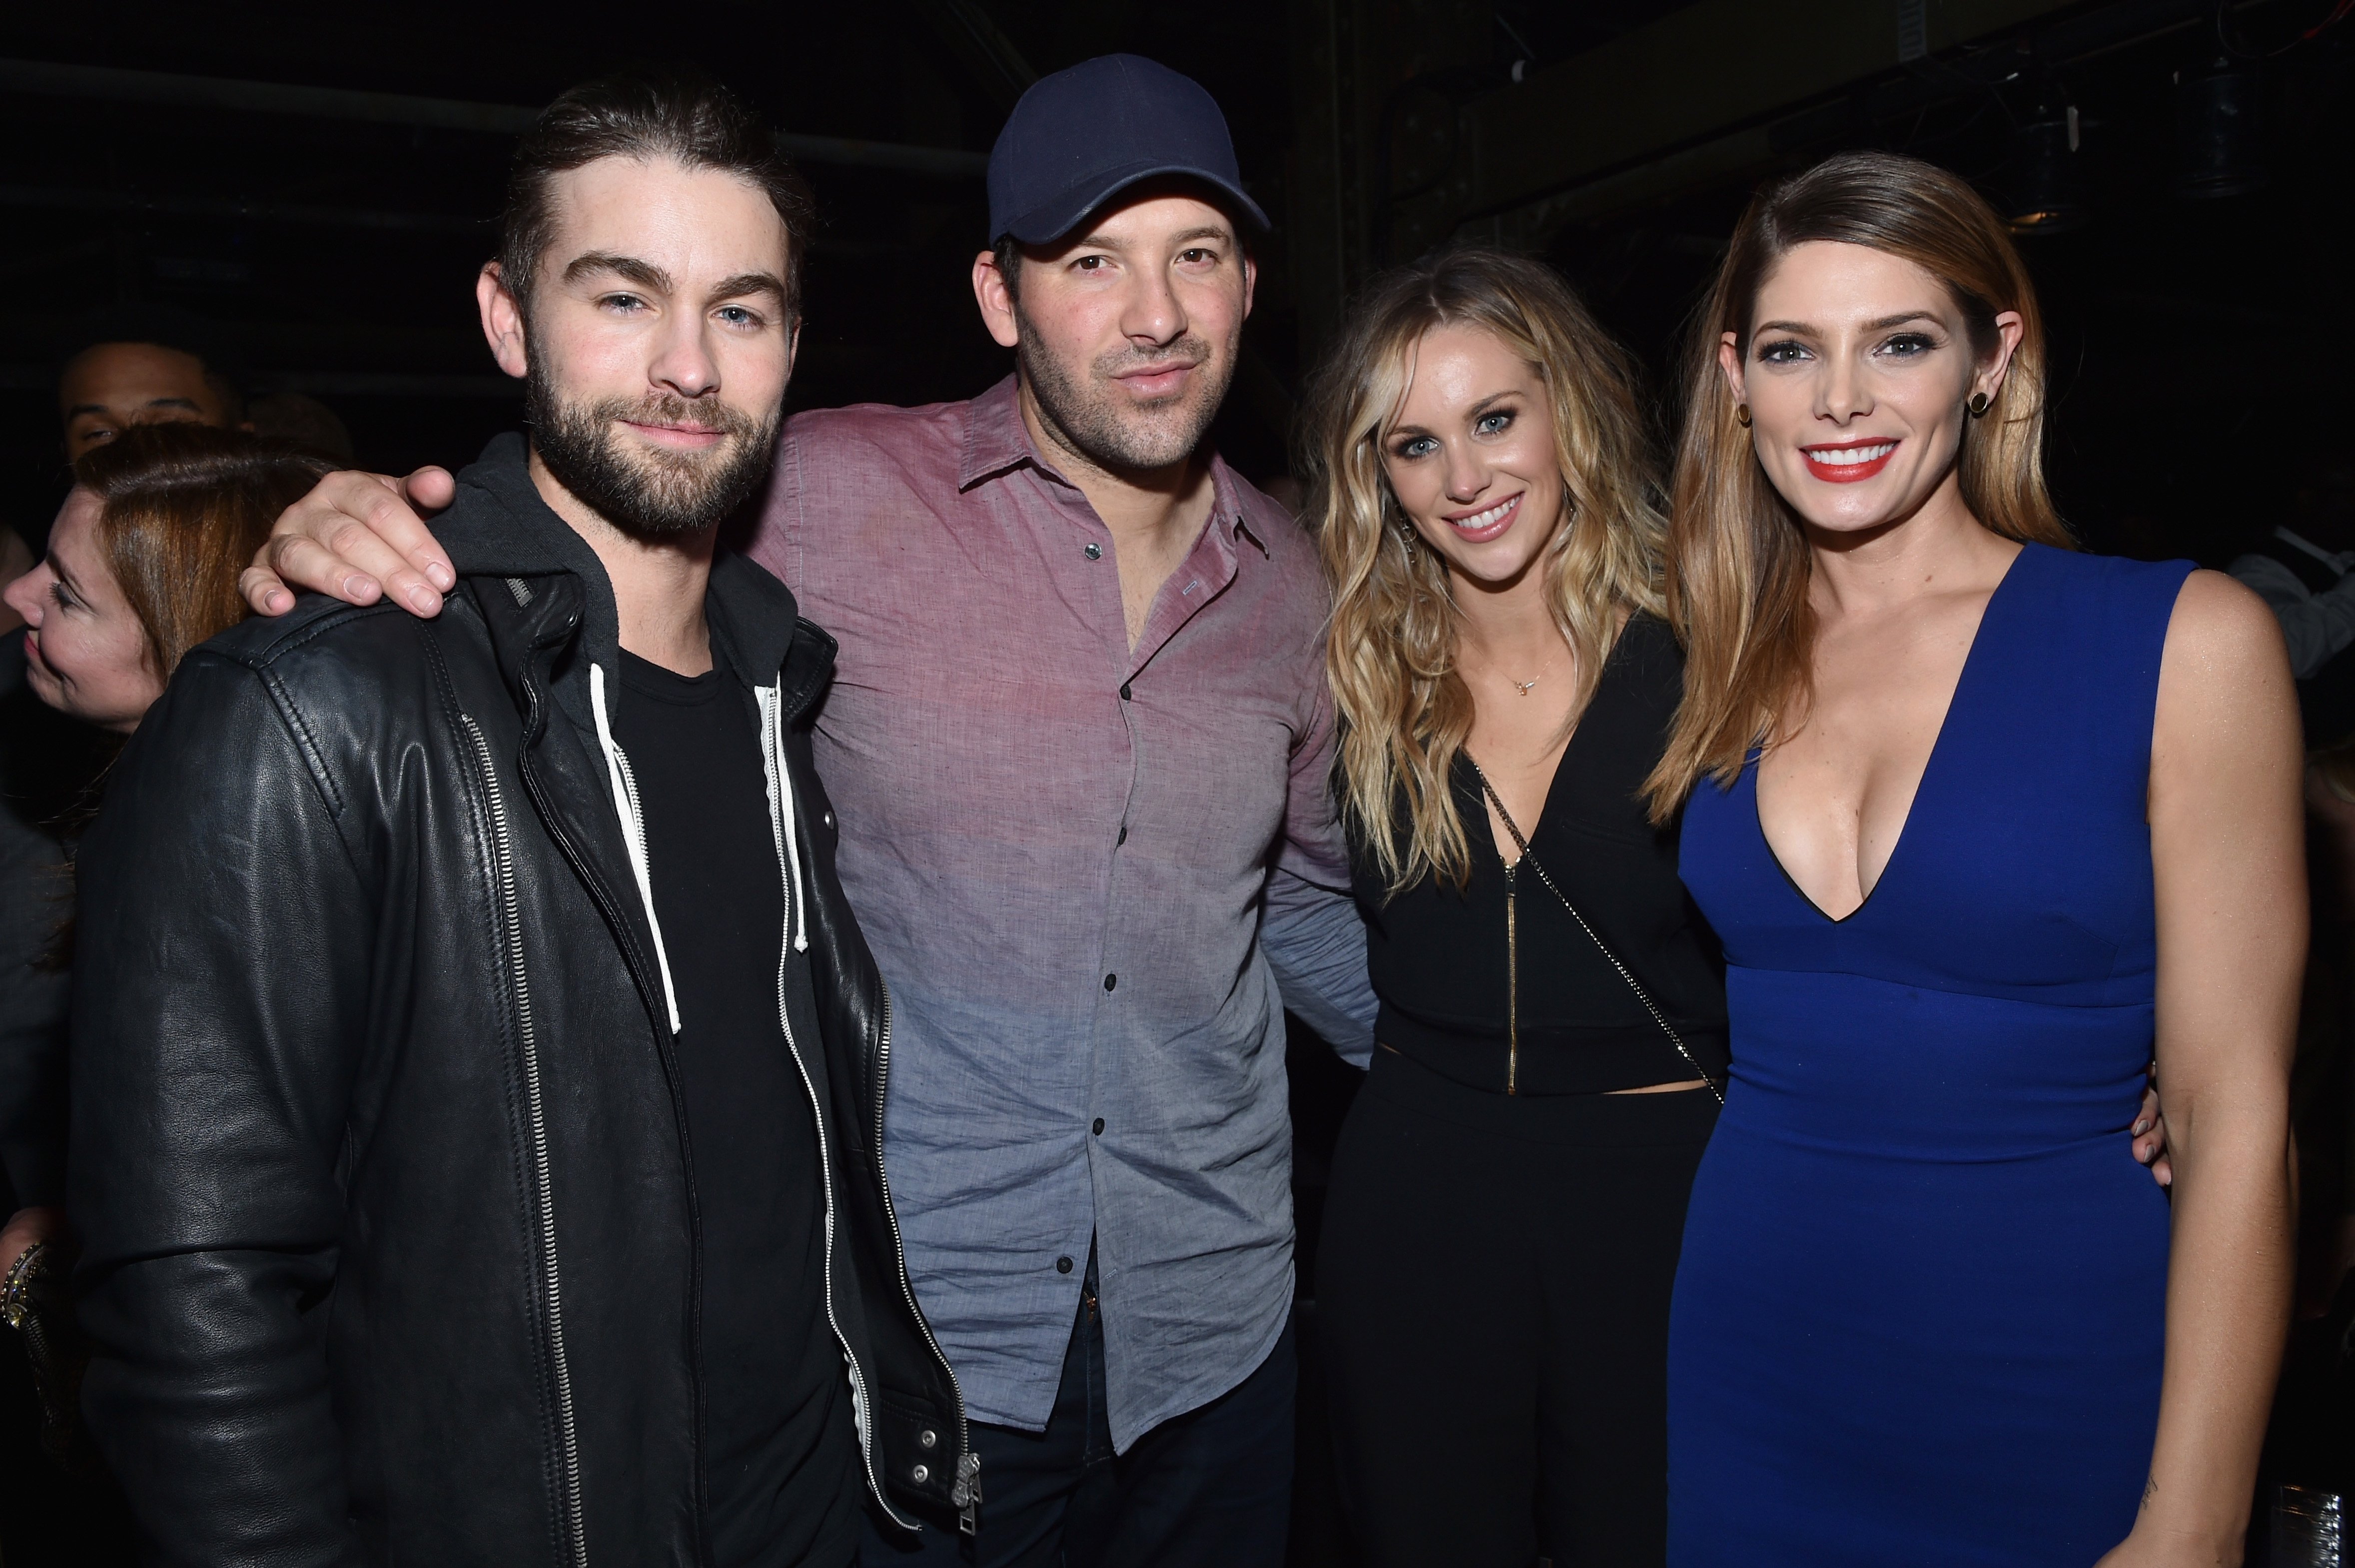 Actor Chace Crawford, NFL player Tony Romo, reporter Candice Crawford Romo and actress Ashley Greene attend the DirecTV Super Saturday Night co-hosted by Mark Cuban's AXS TV at Pier 70 on February 6, 2016 in San Francisco, California. | Source: Getty Images 